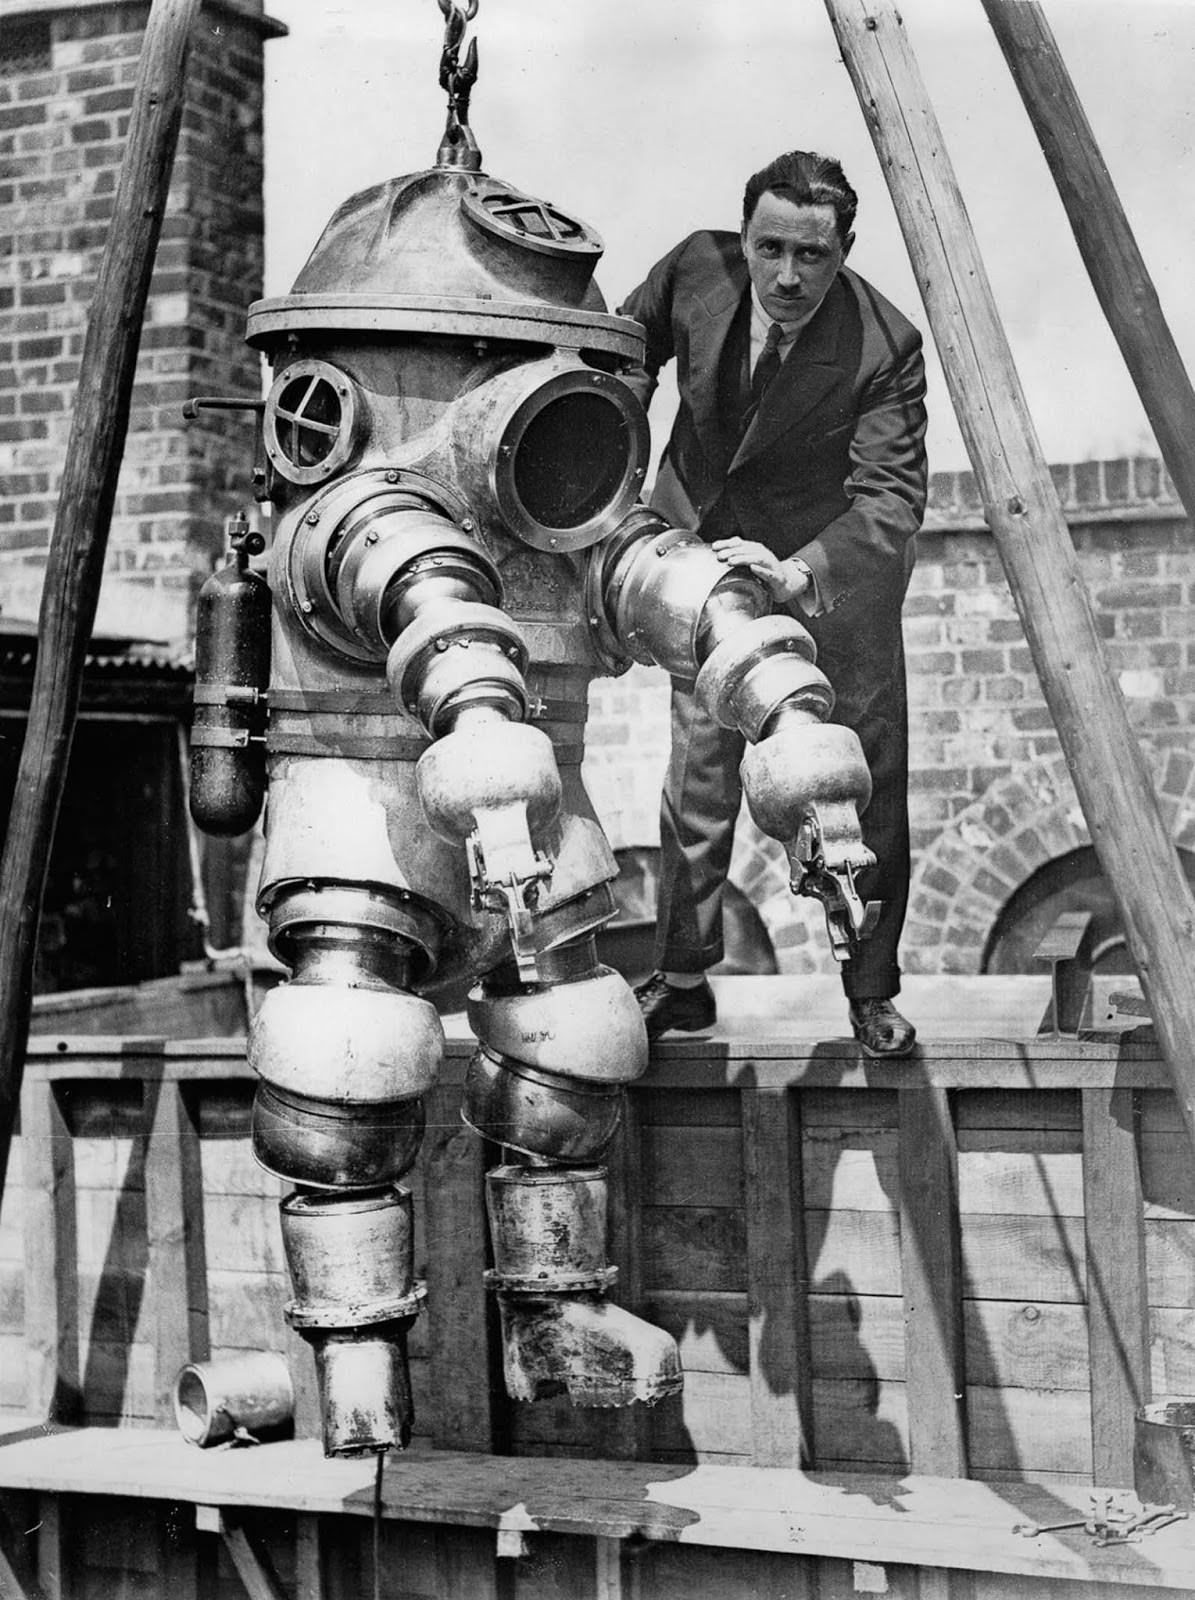 J.S. Peress, the inventor of a new armored diving suit, gets his device ready for tests in a tank at Weybridge, United Kingdom. 1930.